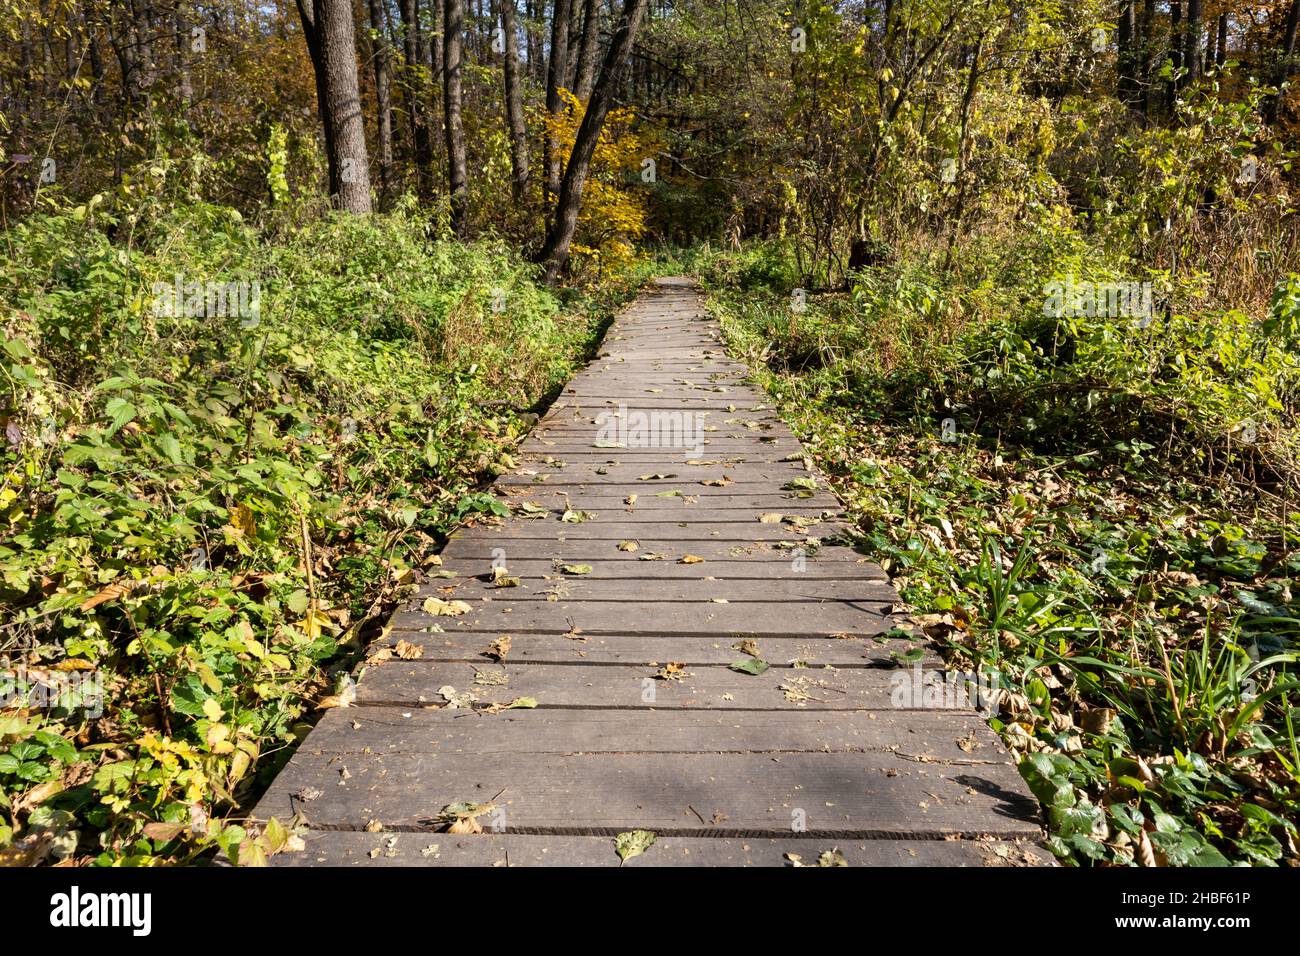 Wooden footbridge through the forest. The trail of pedestrians made of boards is adventurous and informative. Selective focus. Stock Photo